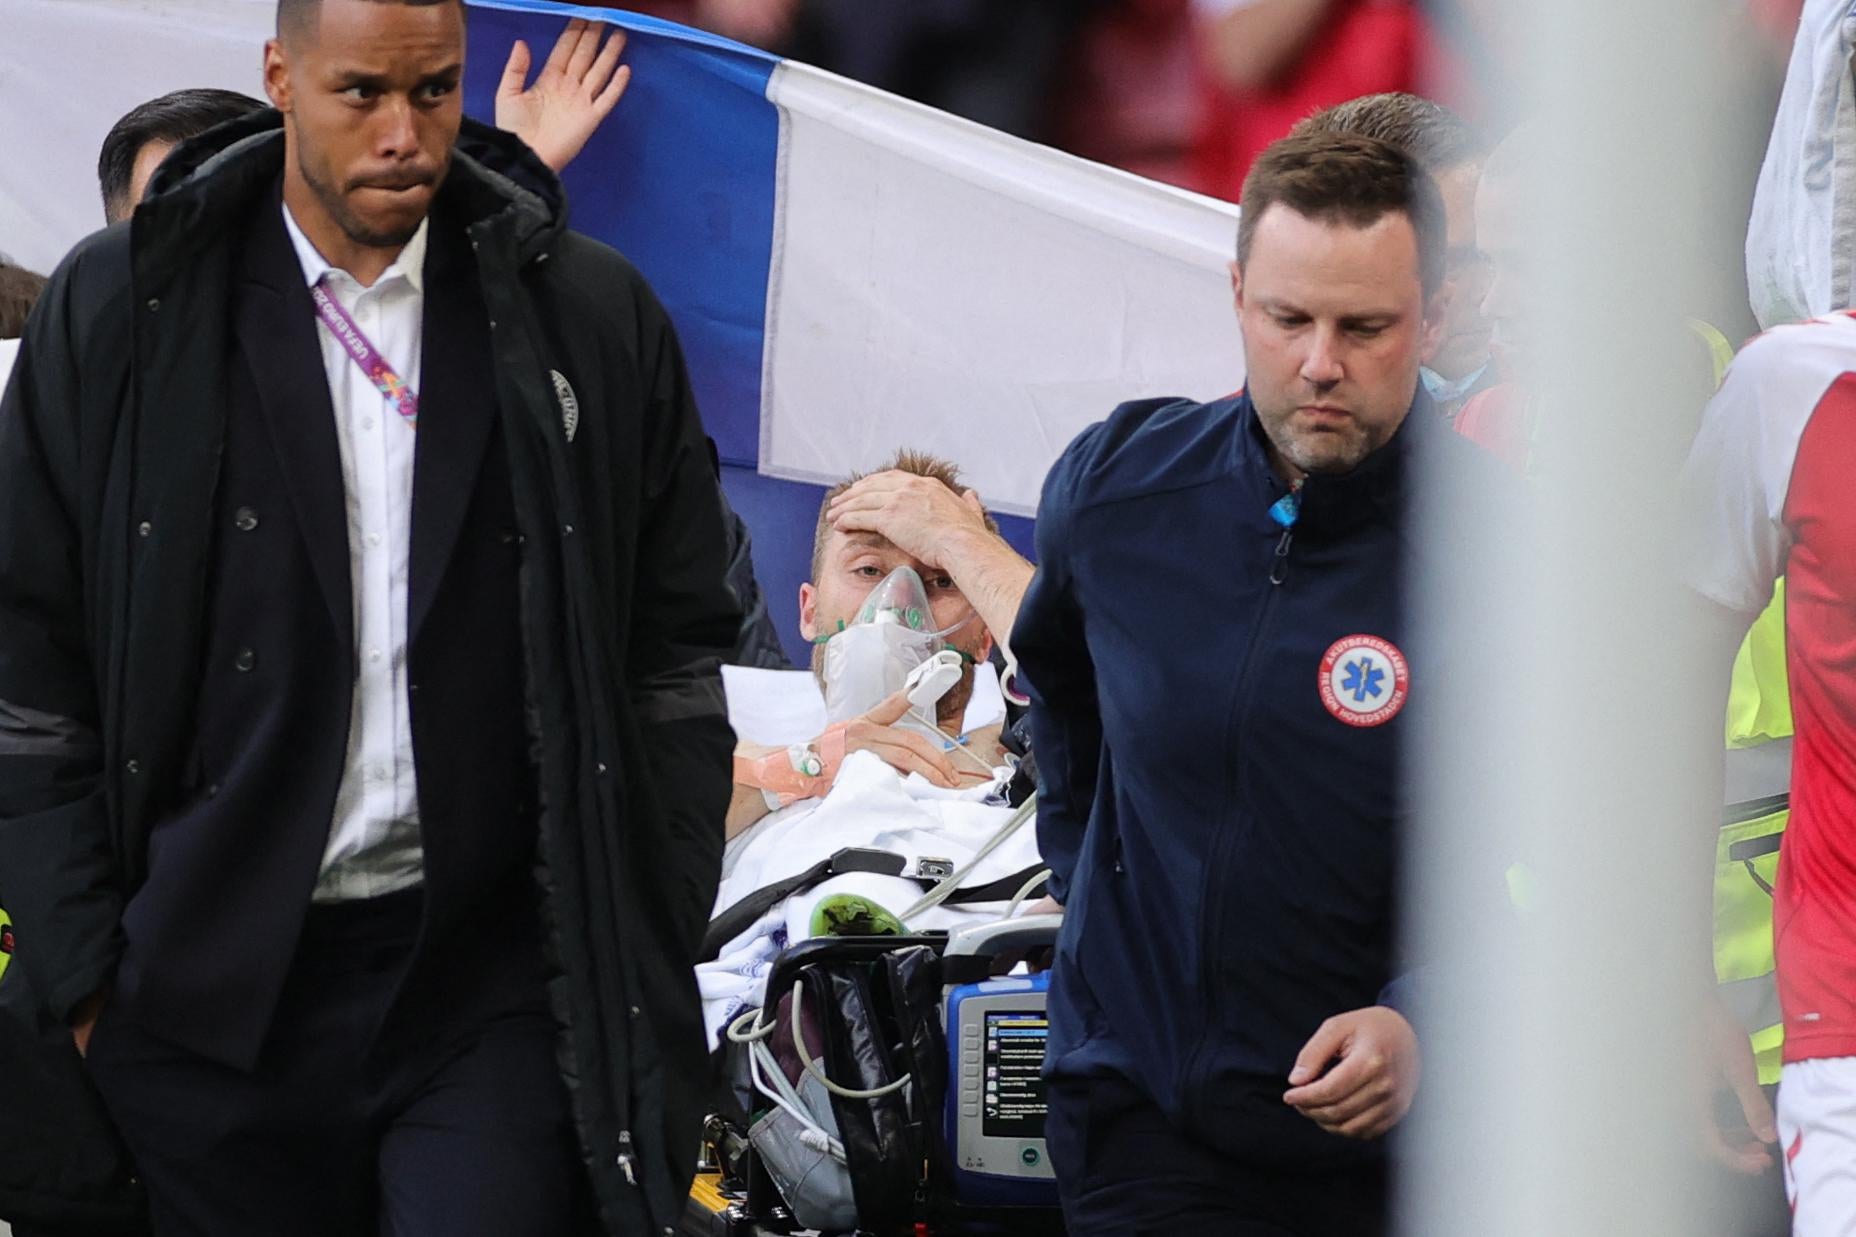 Denmark’s midfielder Christian Eriksen (C) is evacuated after collapsing on the pitch during the UEFA EURO 2020 Group B football match between Denmark and Finland at the Parken Stadium in Copenhagen on June 12, 2021.